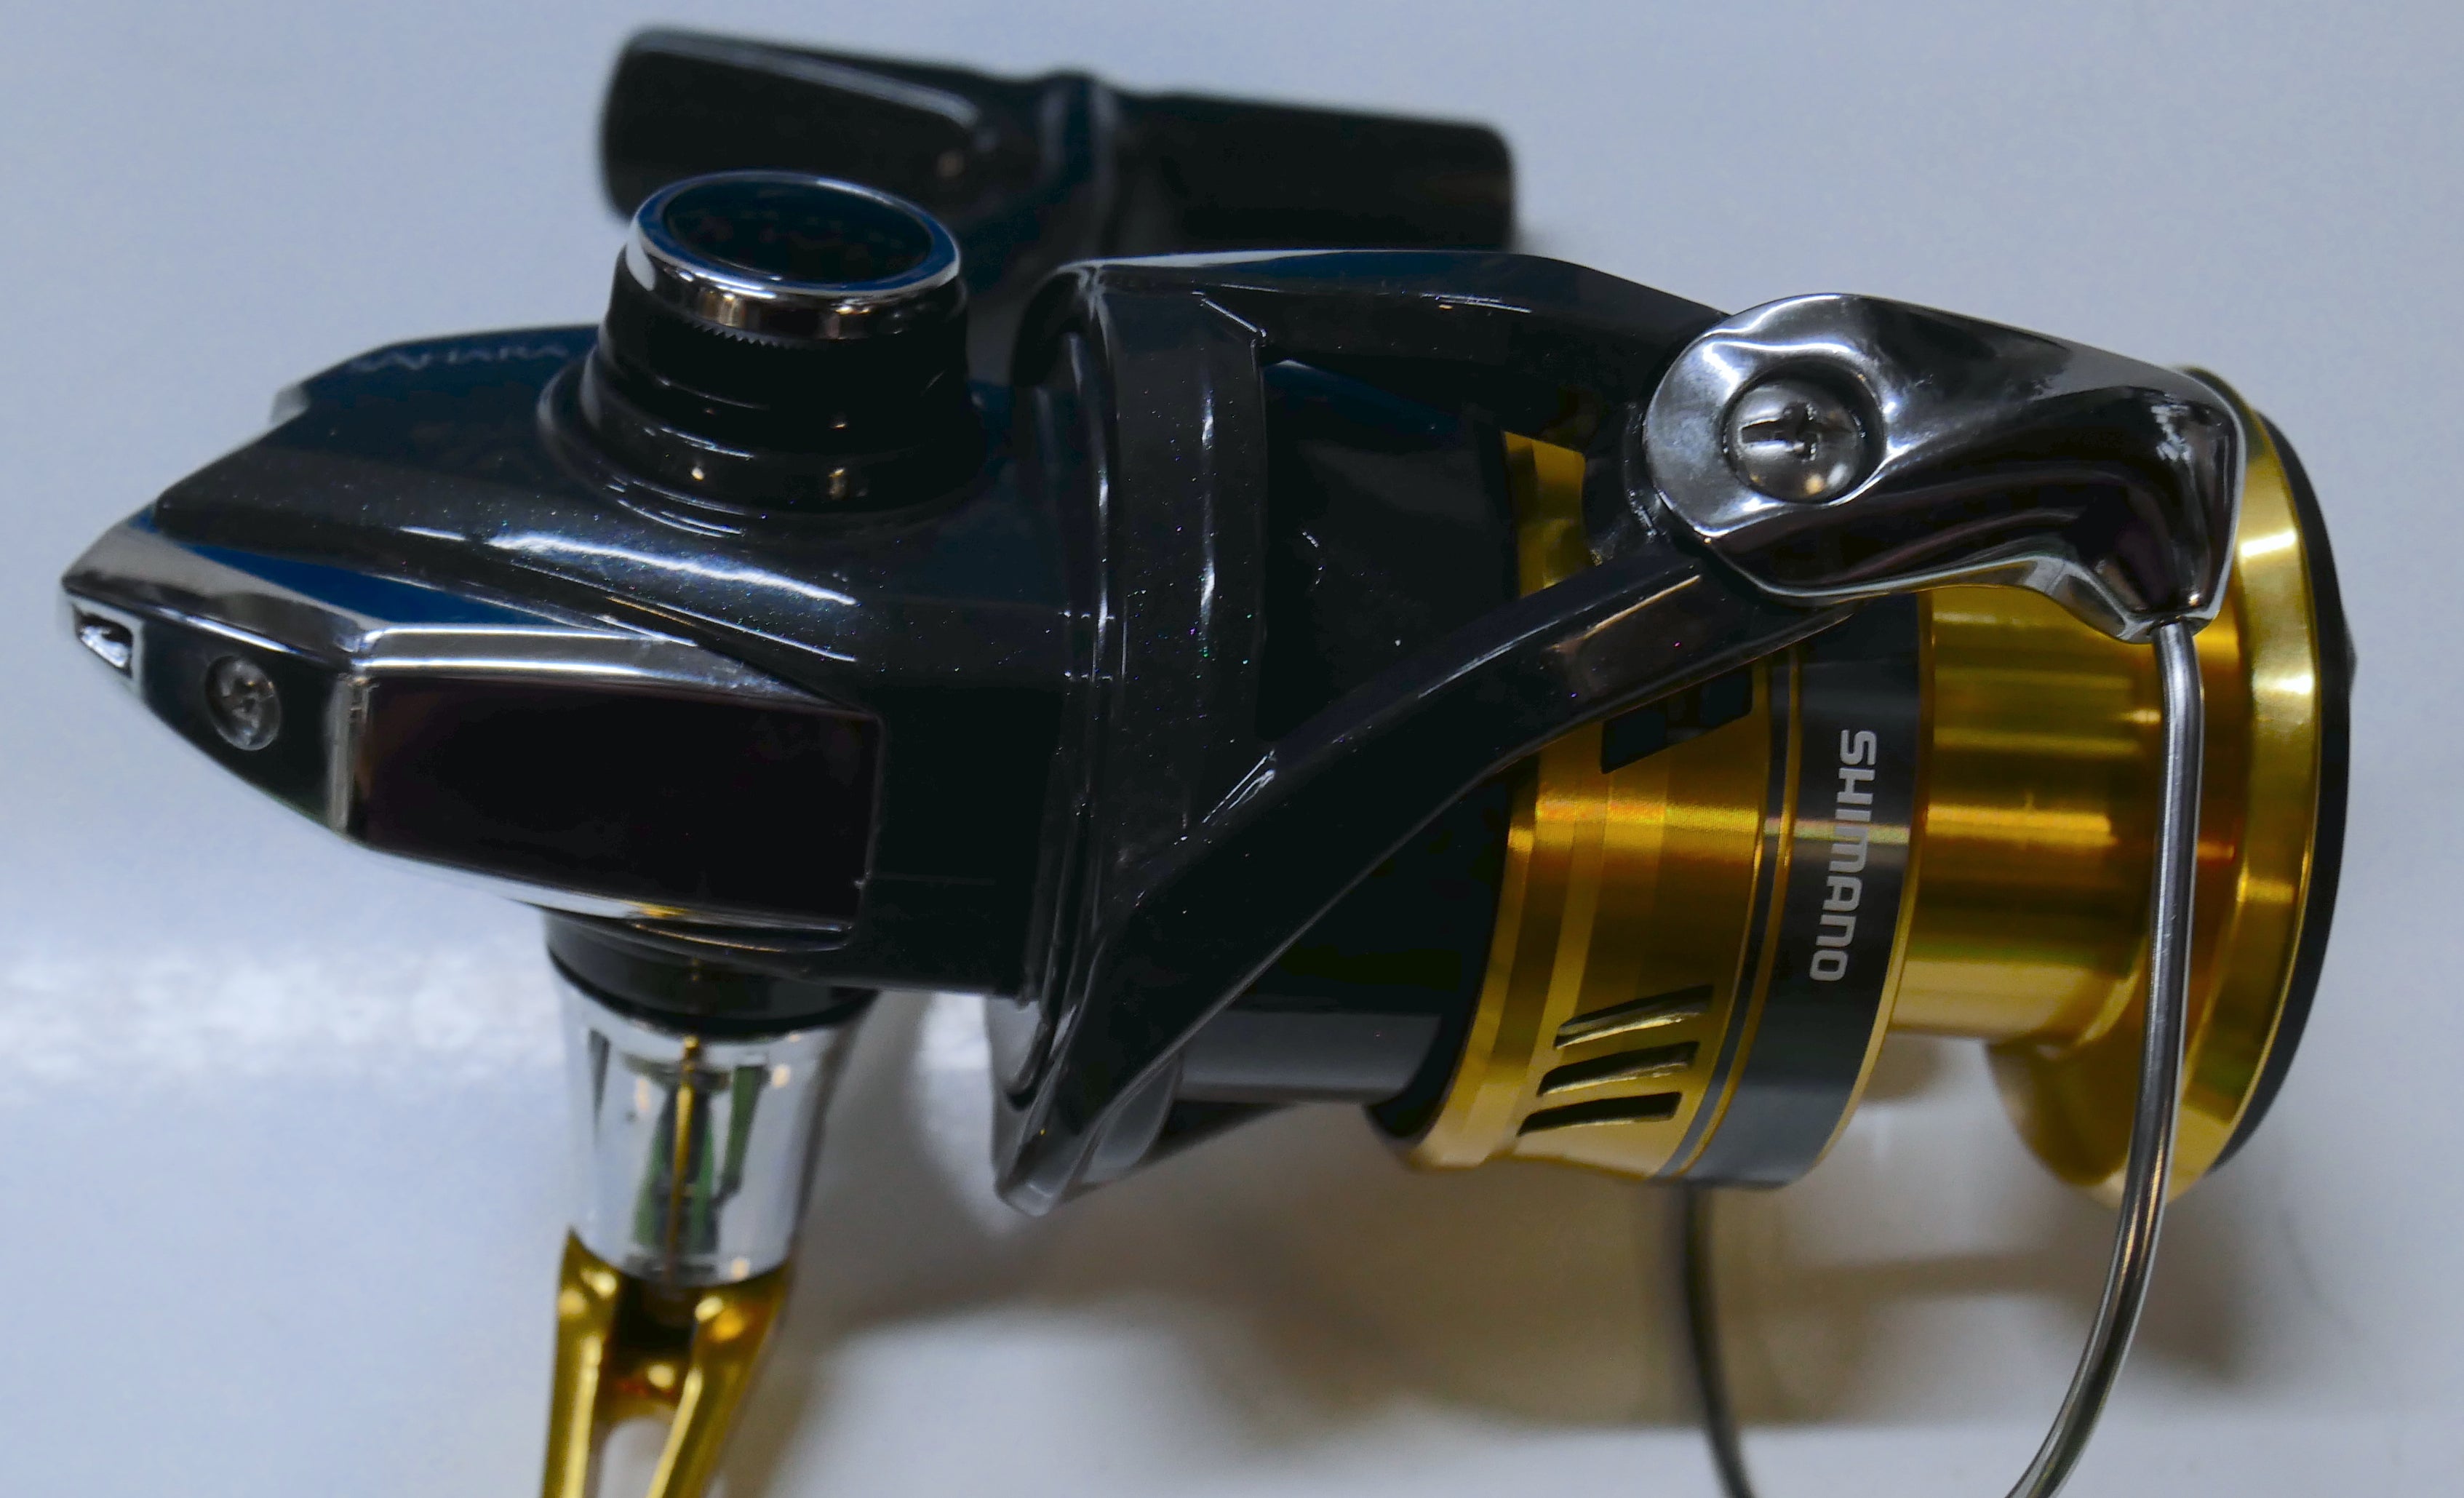 New Reel Unboxing! Sahara C3000HG is the best reel for 2021. 